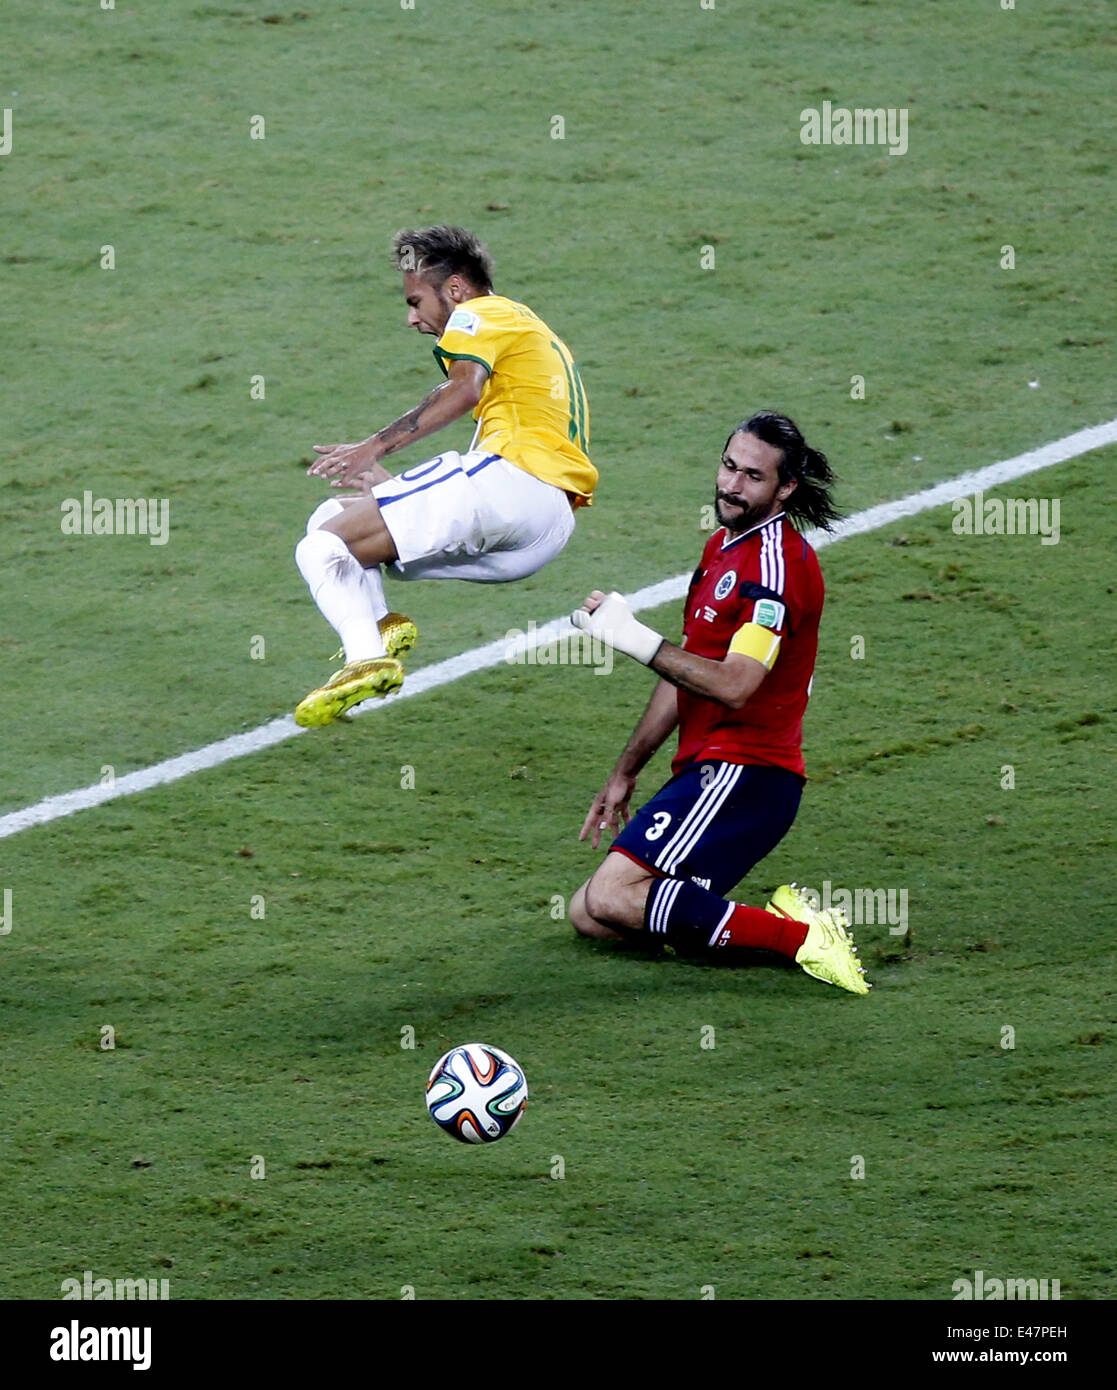 Fortaleza, Brazil. 4th July, 2014. Brazil's Neymar (L) vies with Colombia's Mario Yepes during a quarter-finals match between Brazil and Colombia of 2014 FIFA World Cup at the Estadio Castelao Stadium in Fortaleza, Brazil, on July 4, 2014. Brazil won 2-1 over Colombia and qualified for semi-finals on Friday. Credit:  Liao Yujie/Xinhua/Alamy Live News Stock Photo